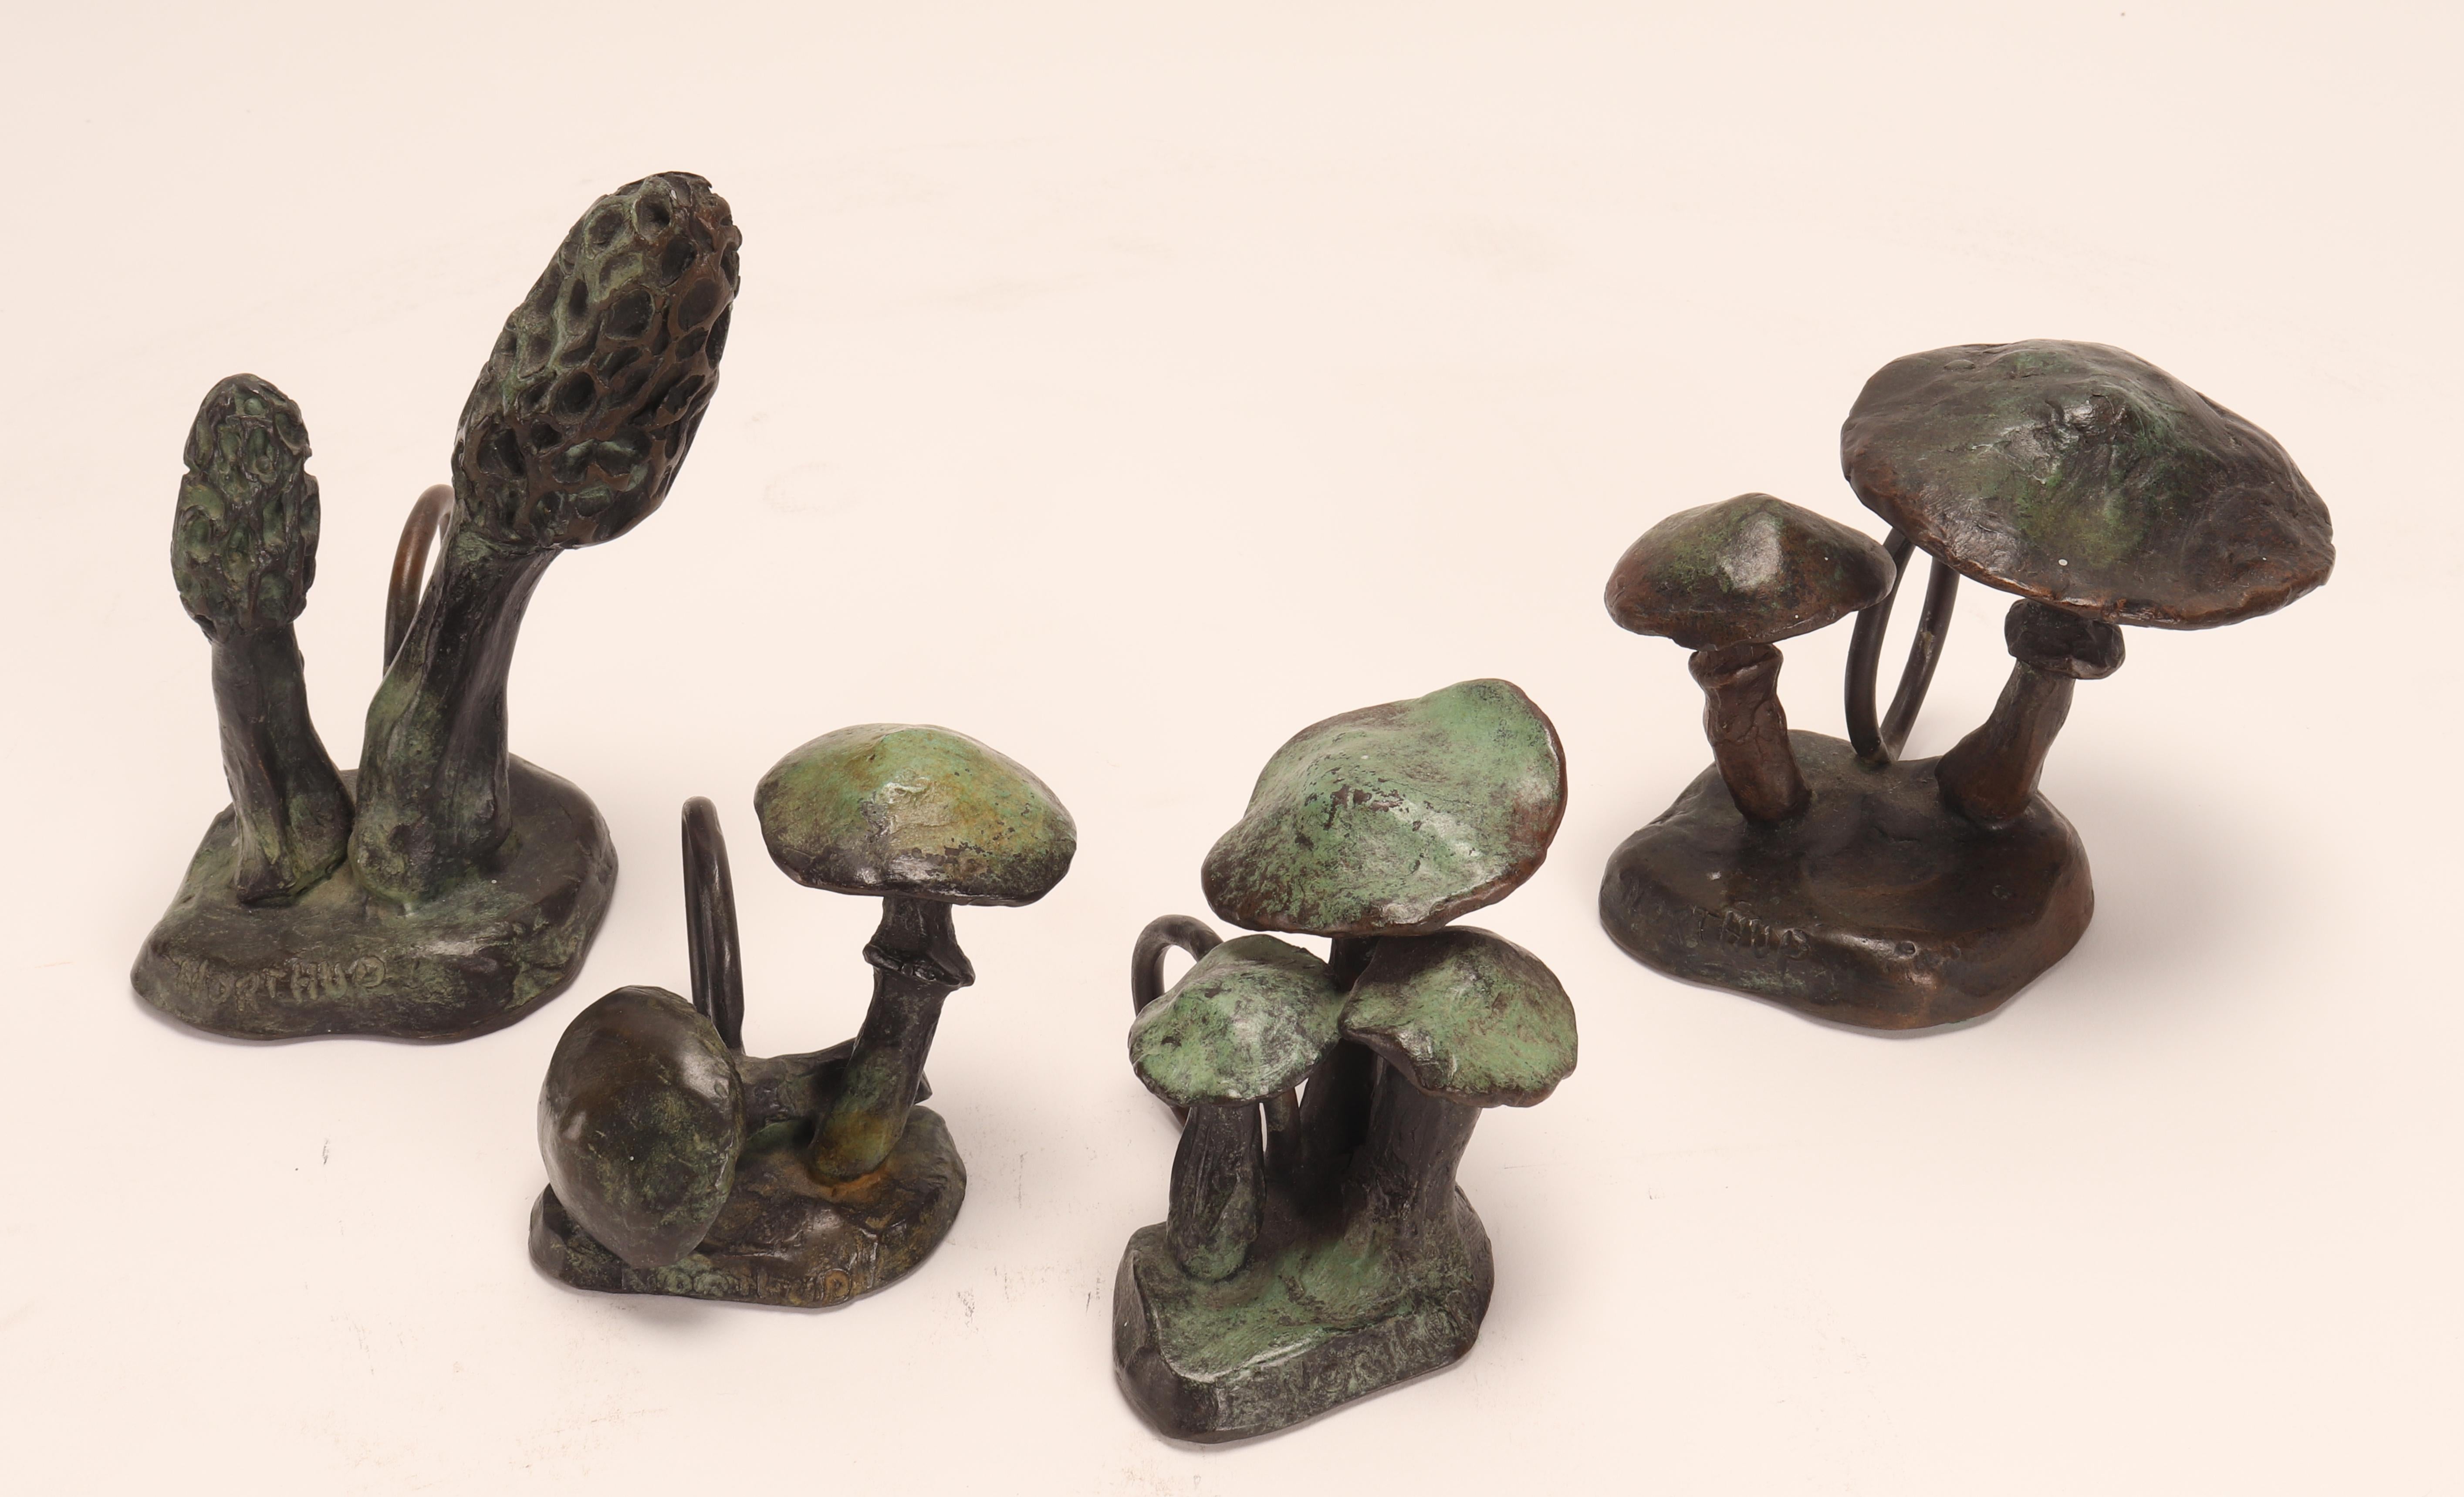 A group of four sculptures with the function of napkin holder, made by George Northup (1940-2017) in bronze, depicting mushrooms. United States of America circa 1960.